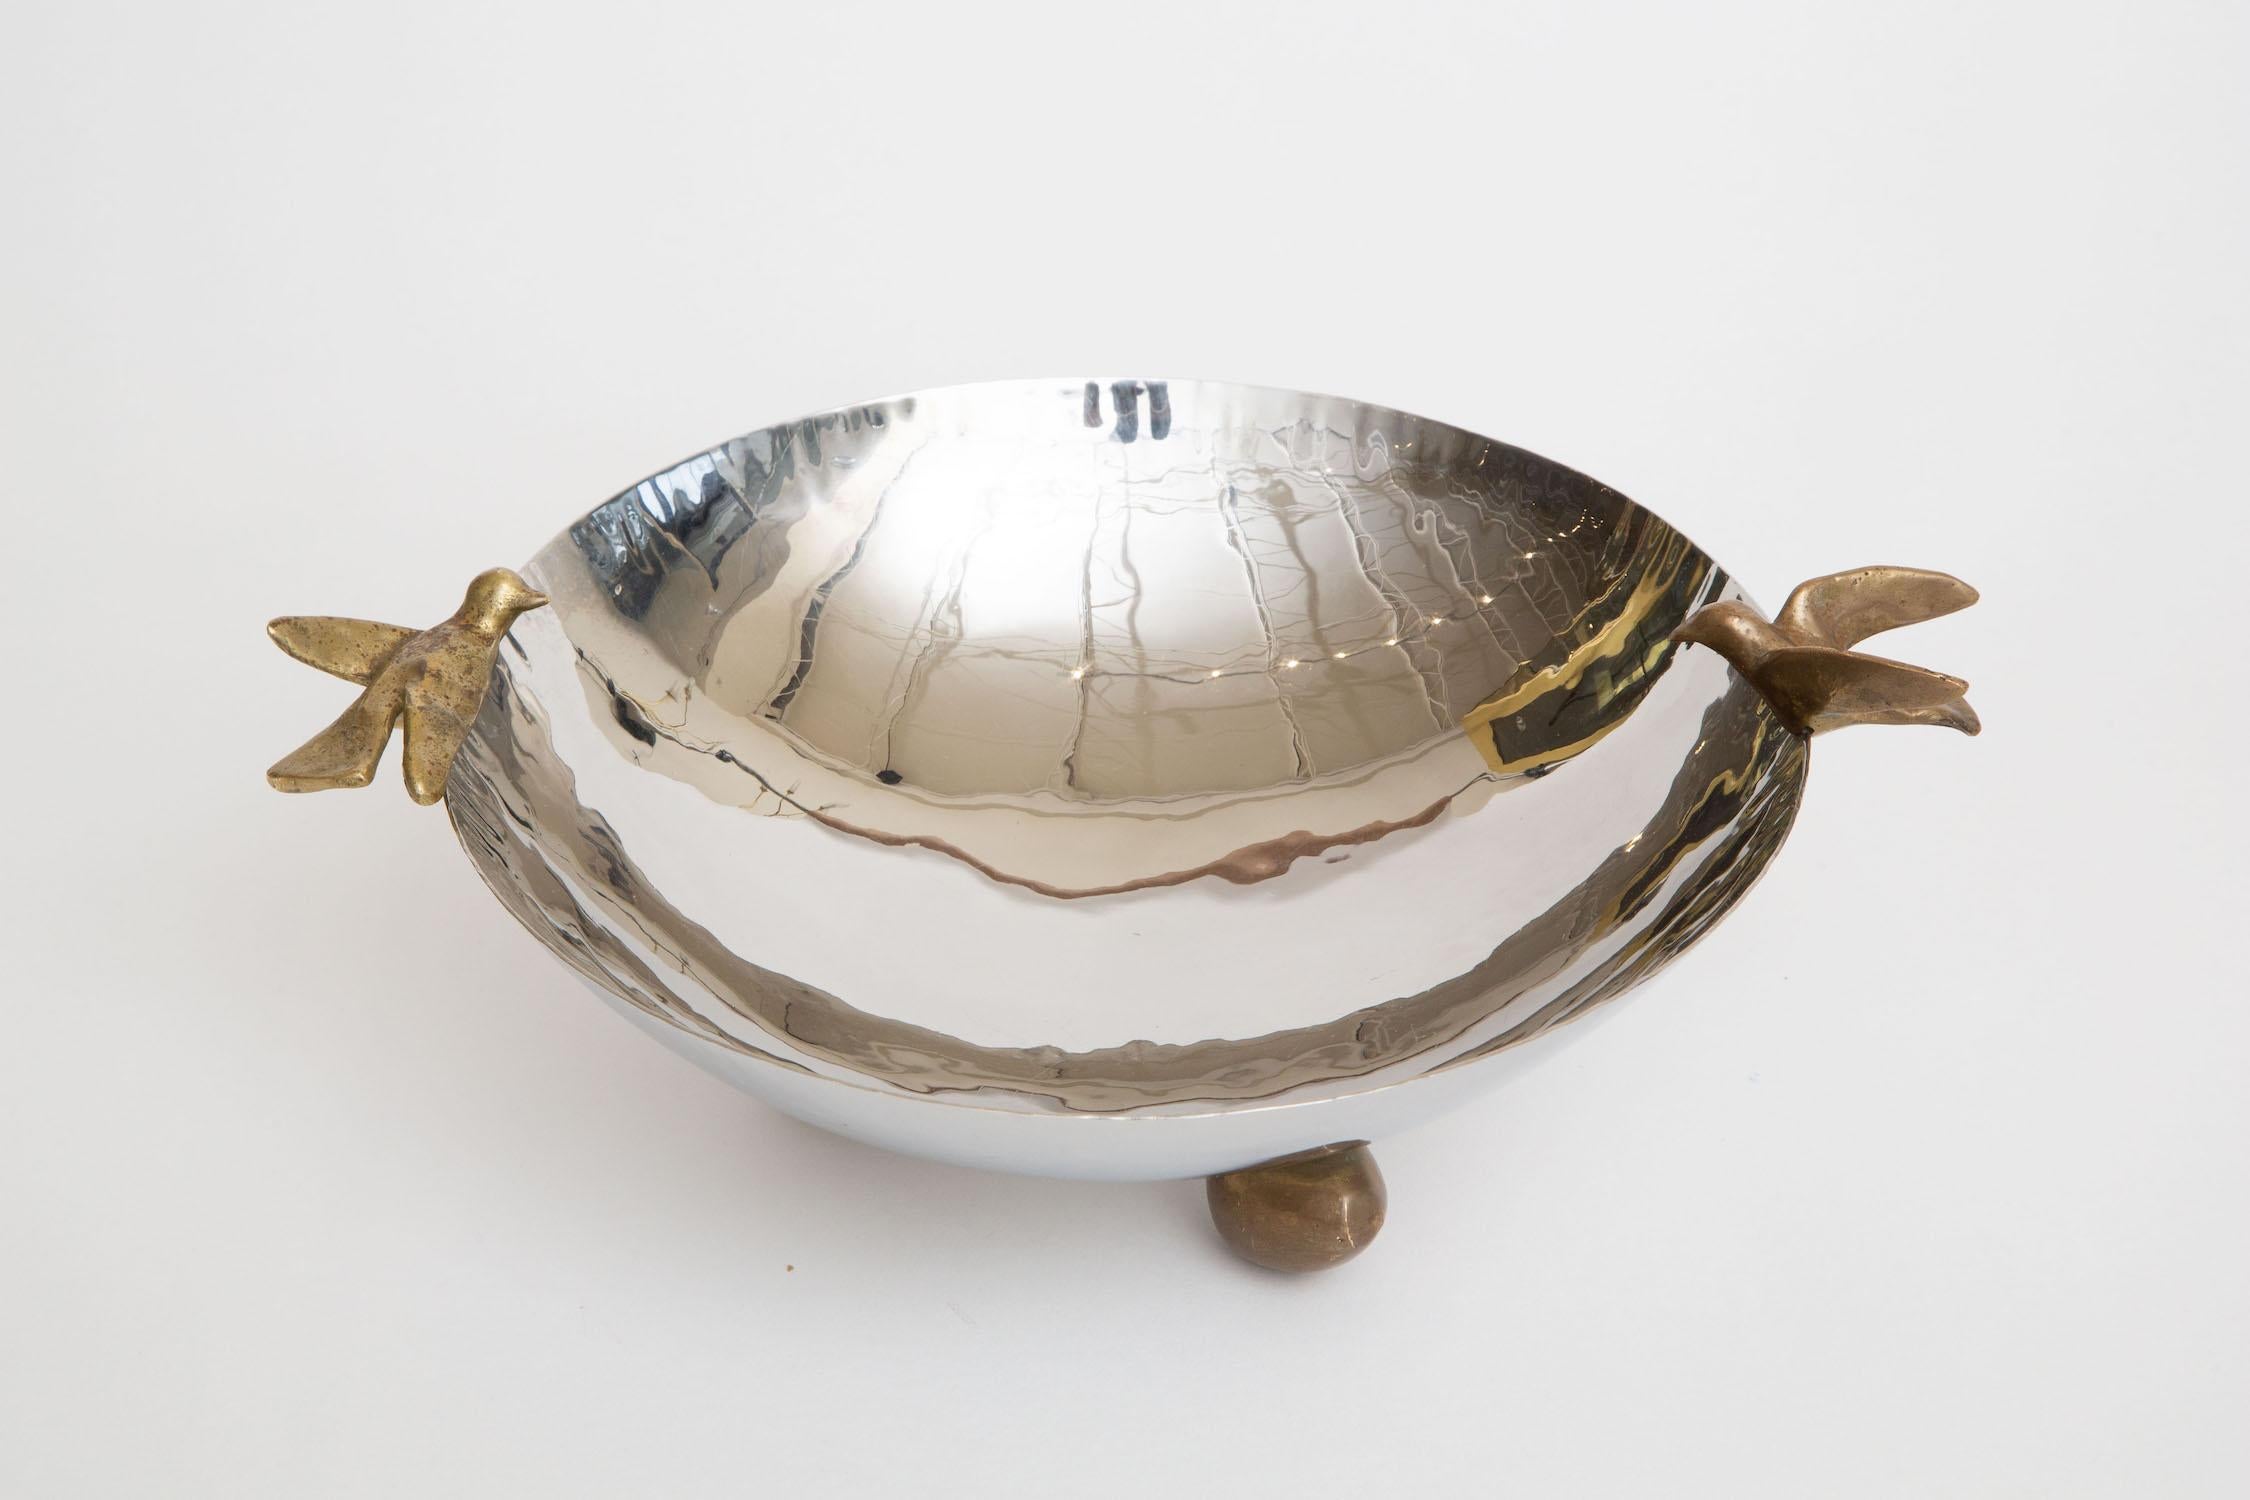 This lovely bowl or serving bowl has brass dove birds on either side and 3 rounded brass ball feet. It is not marked anywhere of the maker. It is from the 80's. it is a combination 2 part metal of nickel silver and brass. it is best for serving for